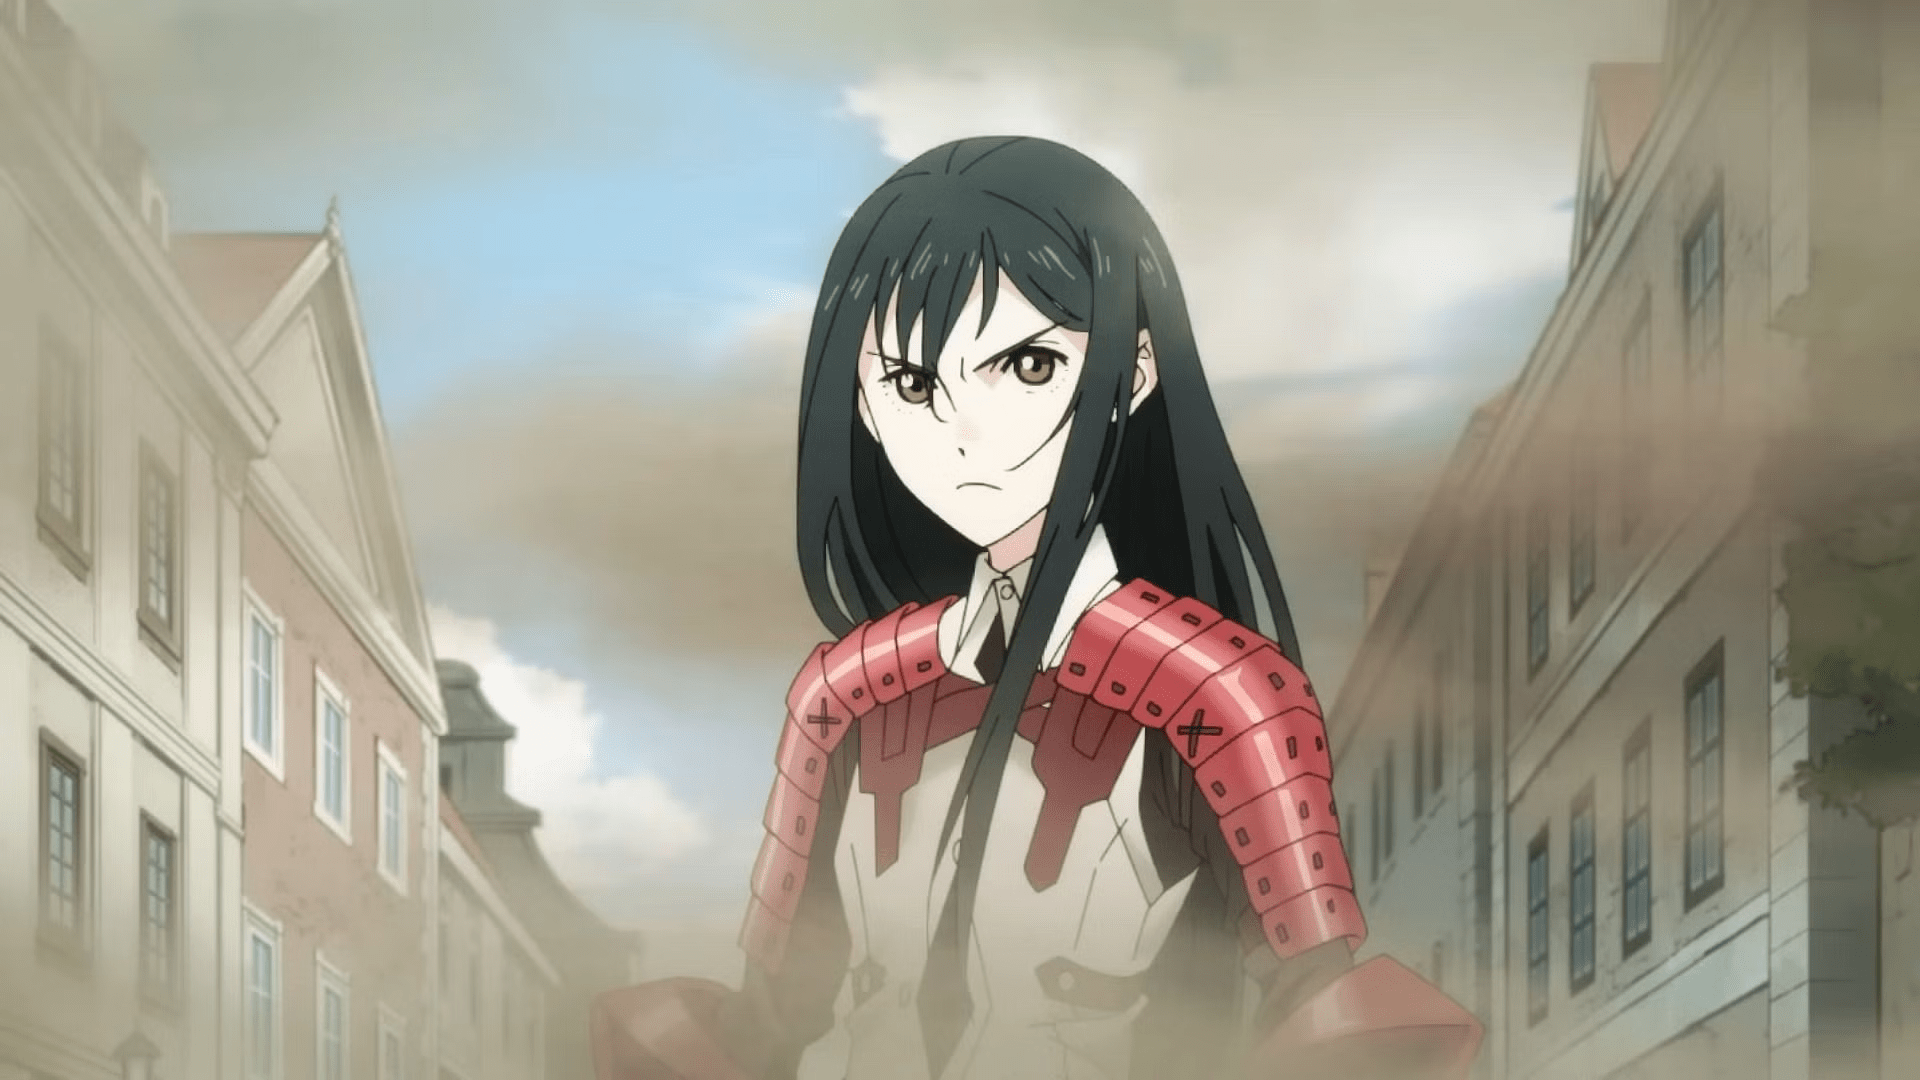 15 strongest female characters in anime, ranked